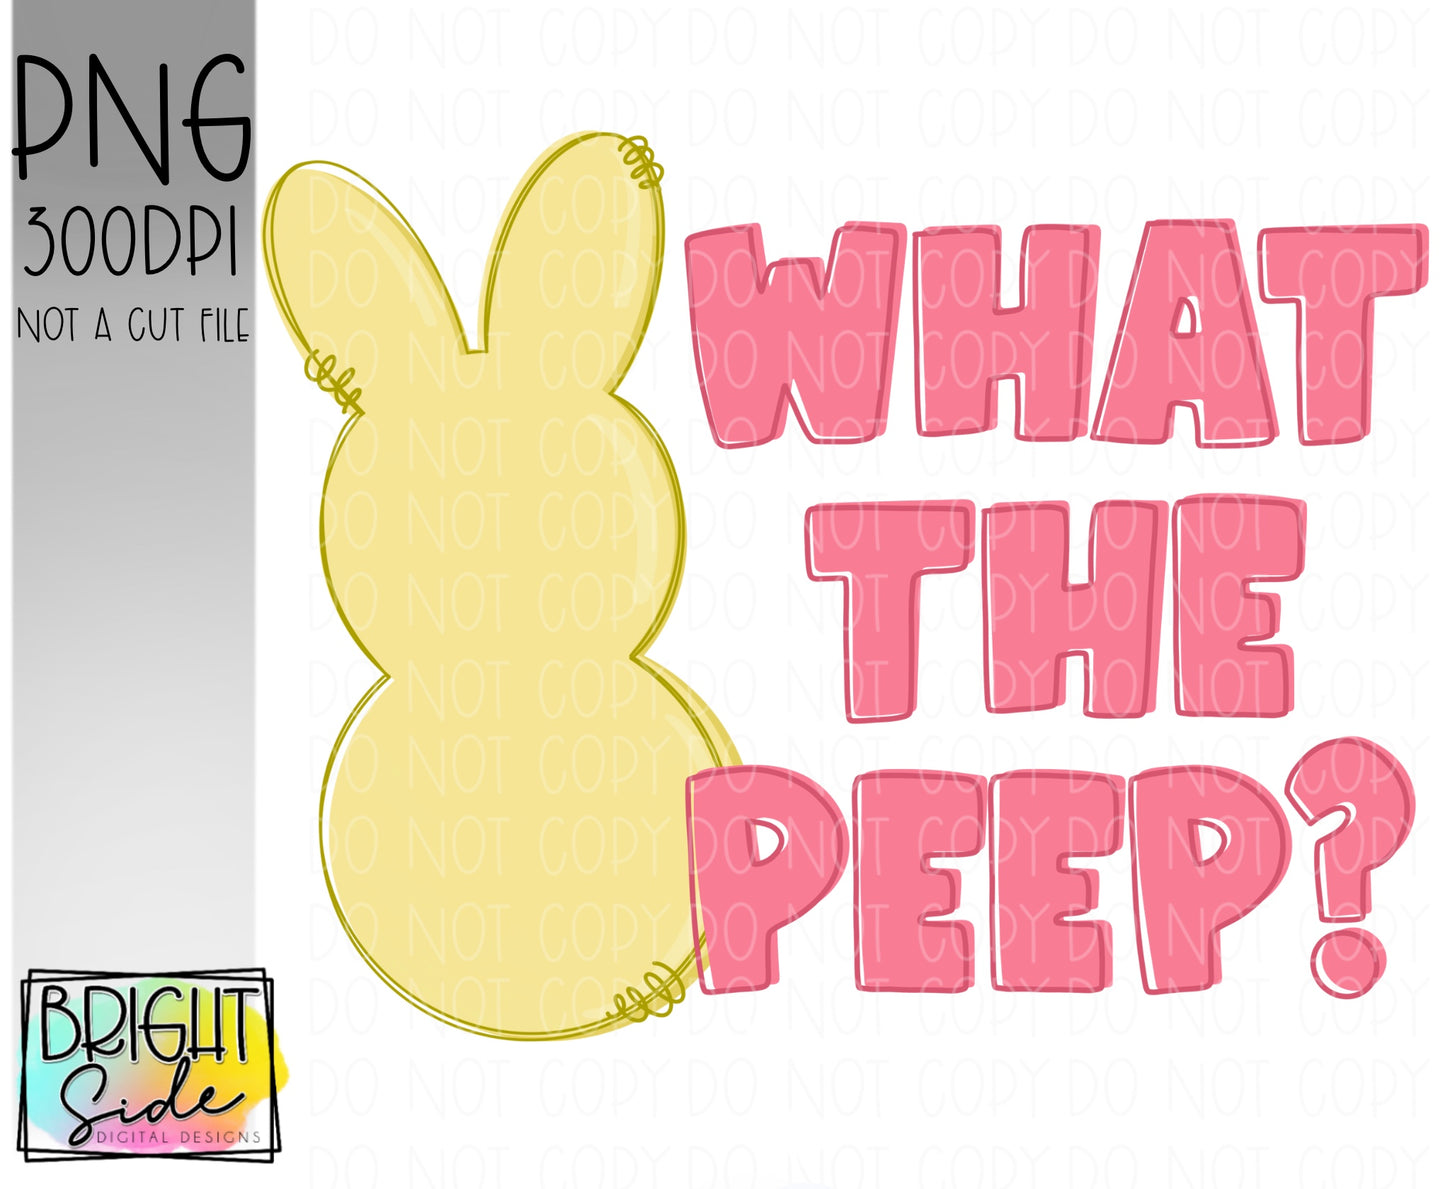 What the peep?